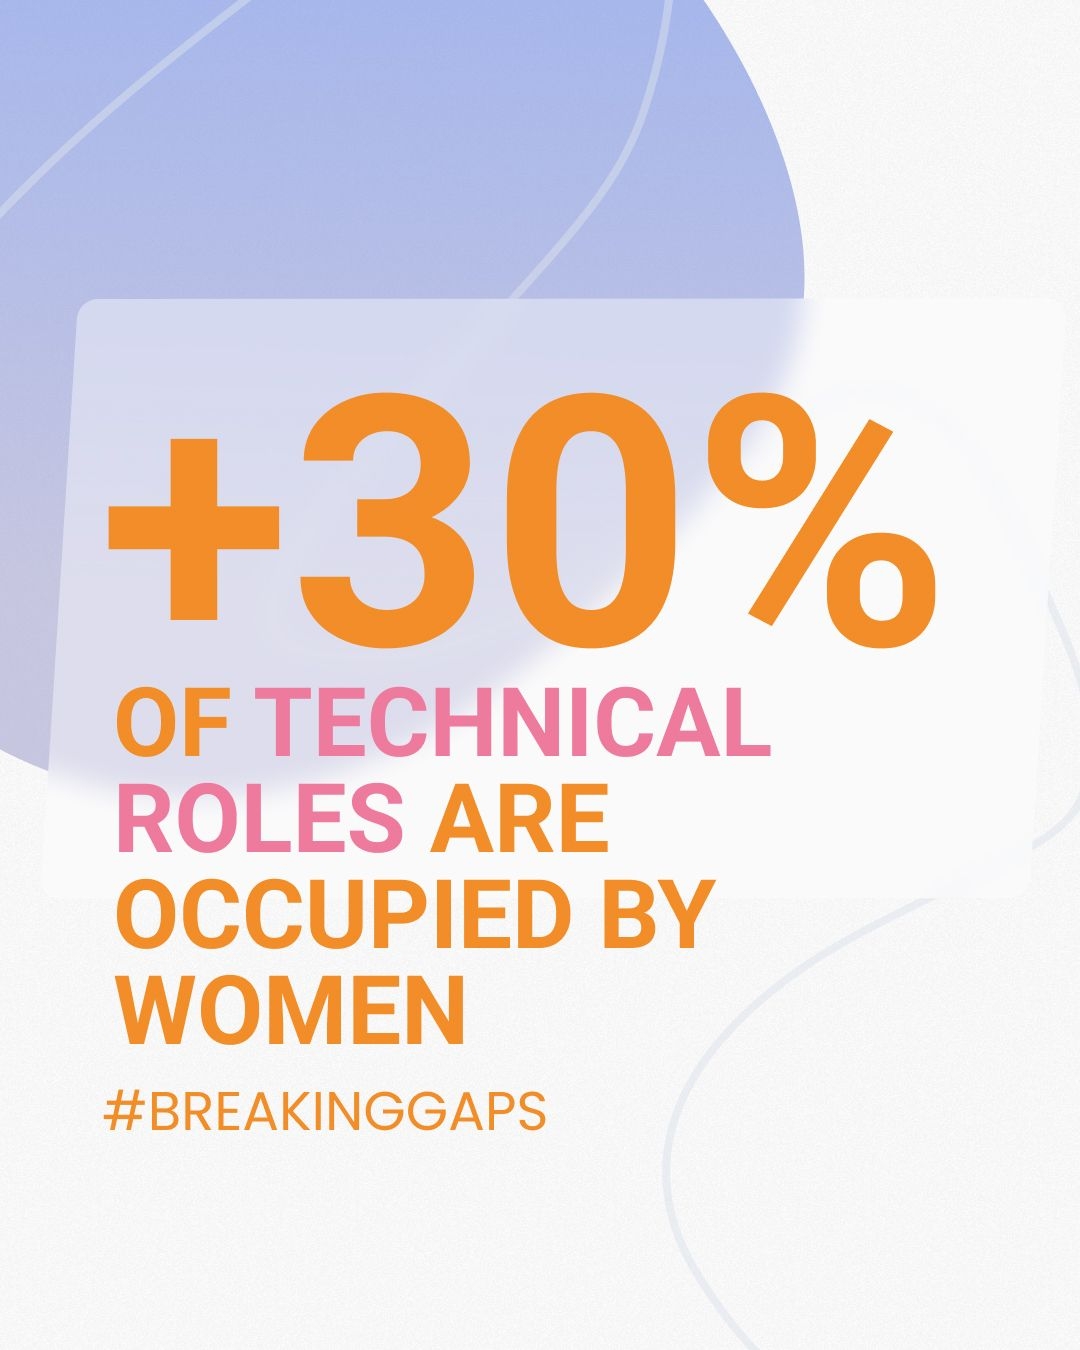 +30% OF TECHNICAL ROLES ARE OCCUPIED BY WOMEN